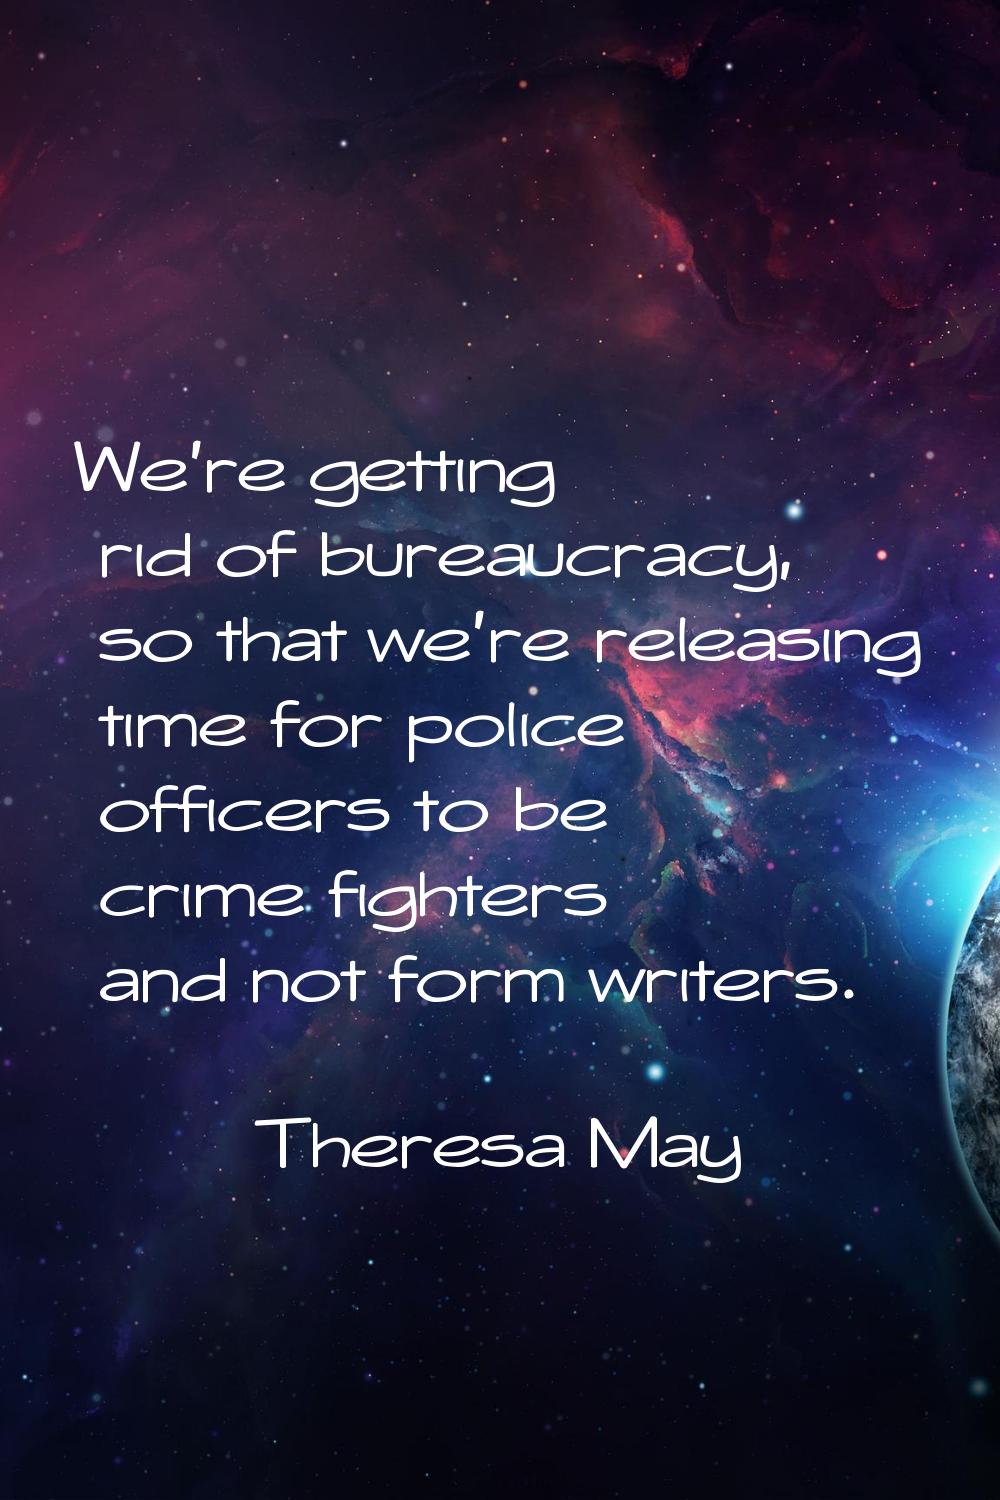 We're getting rid of bureaucracy, so that we're releasing time for police officers to be crime figh